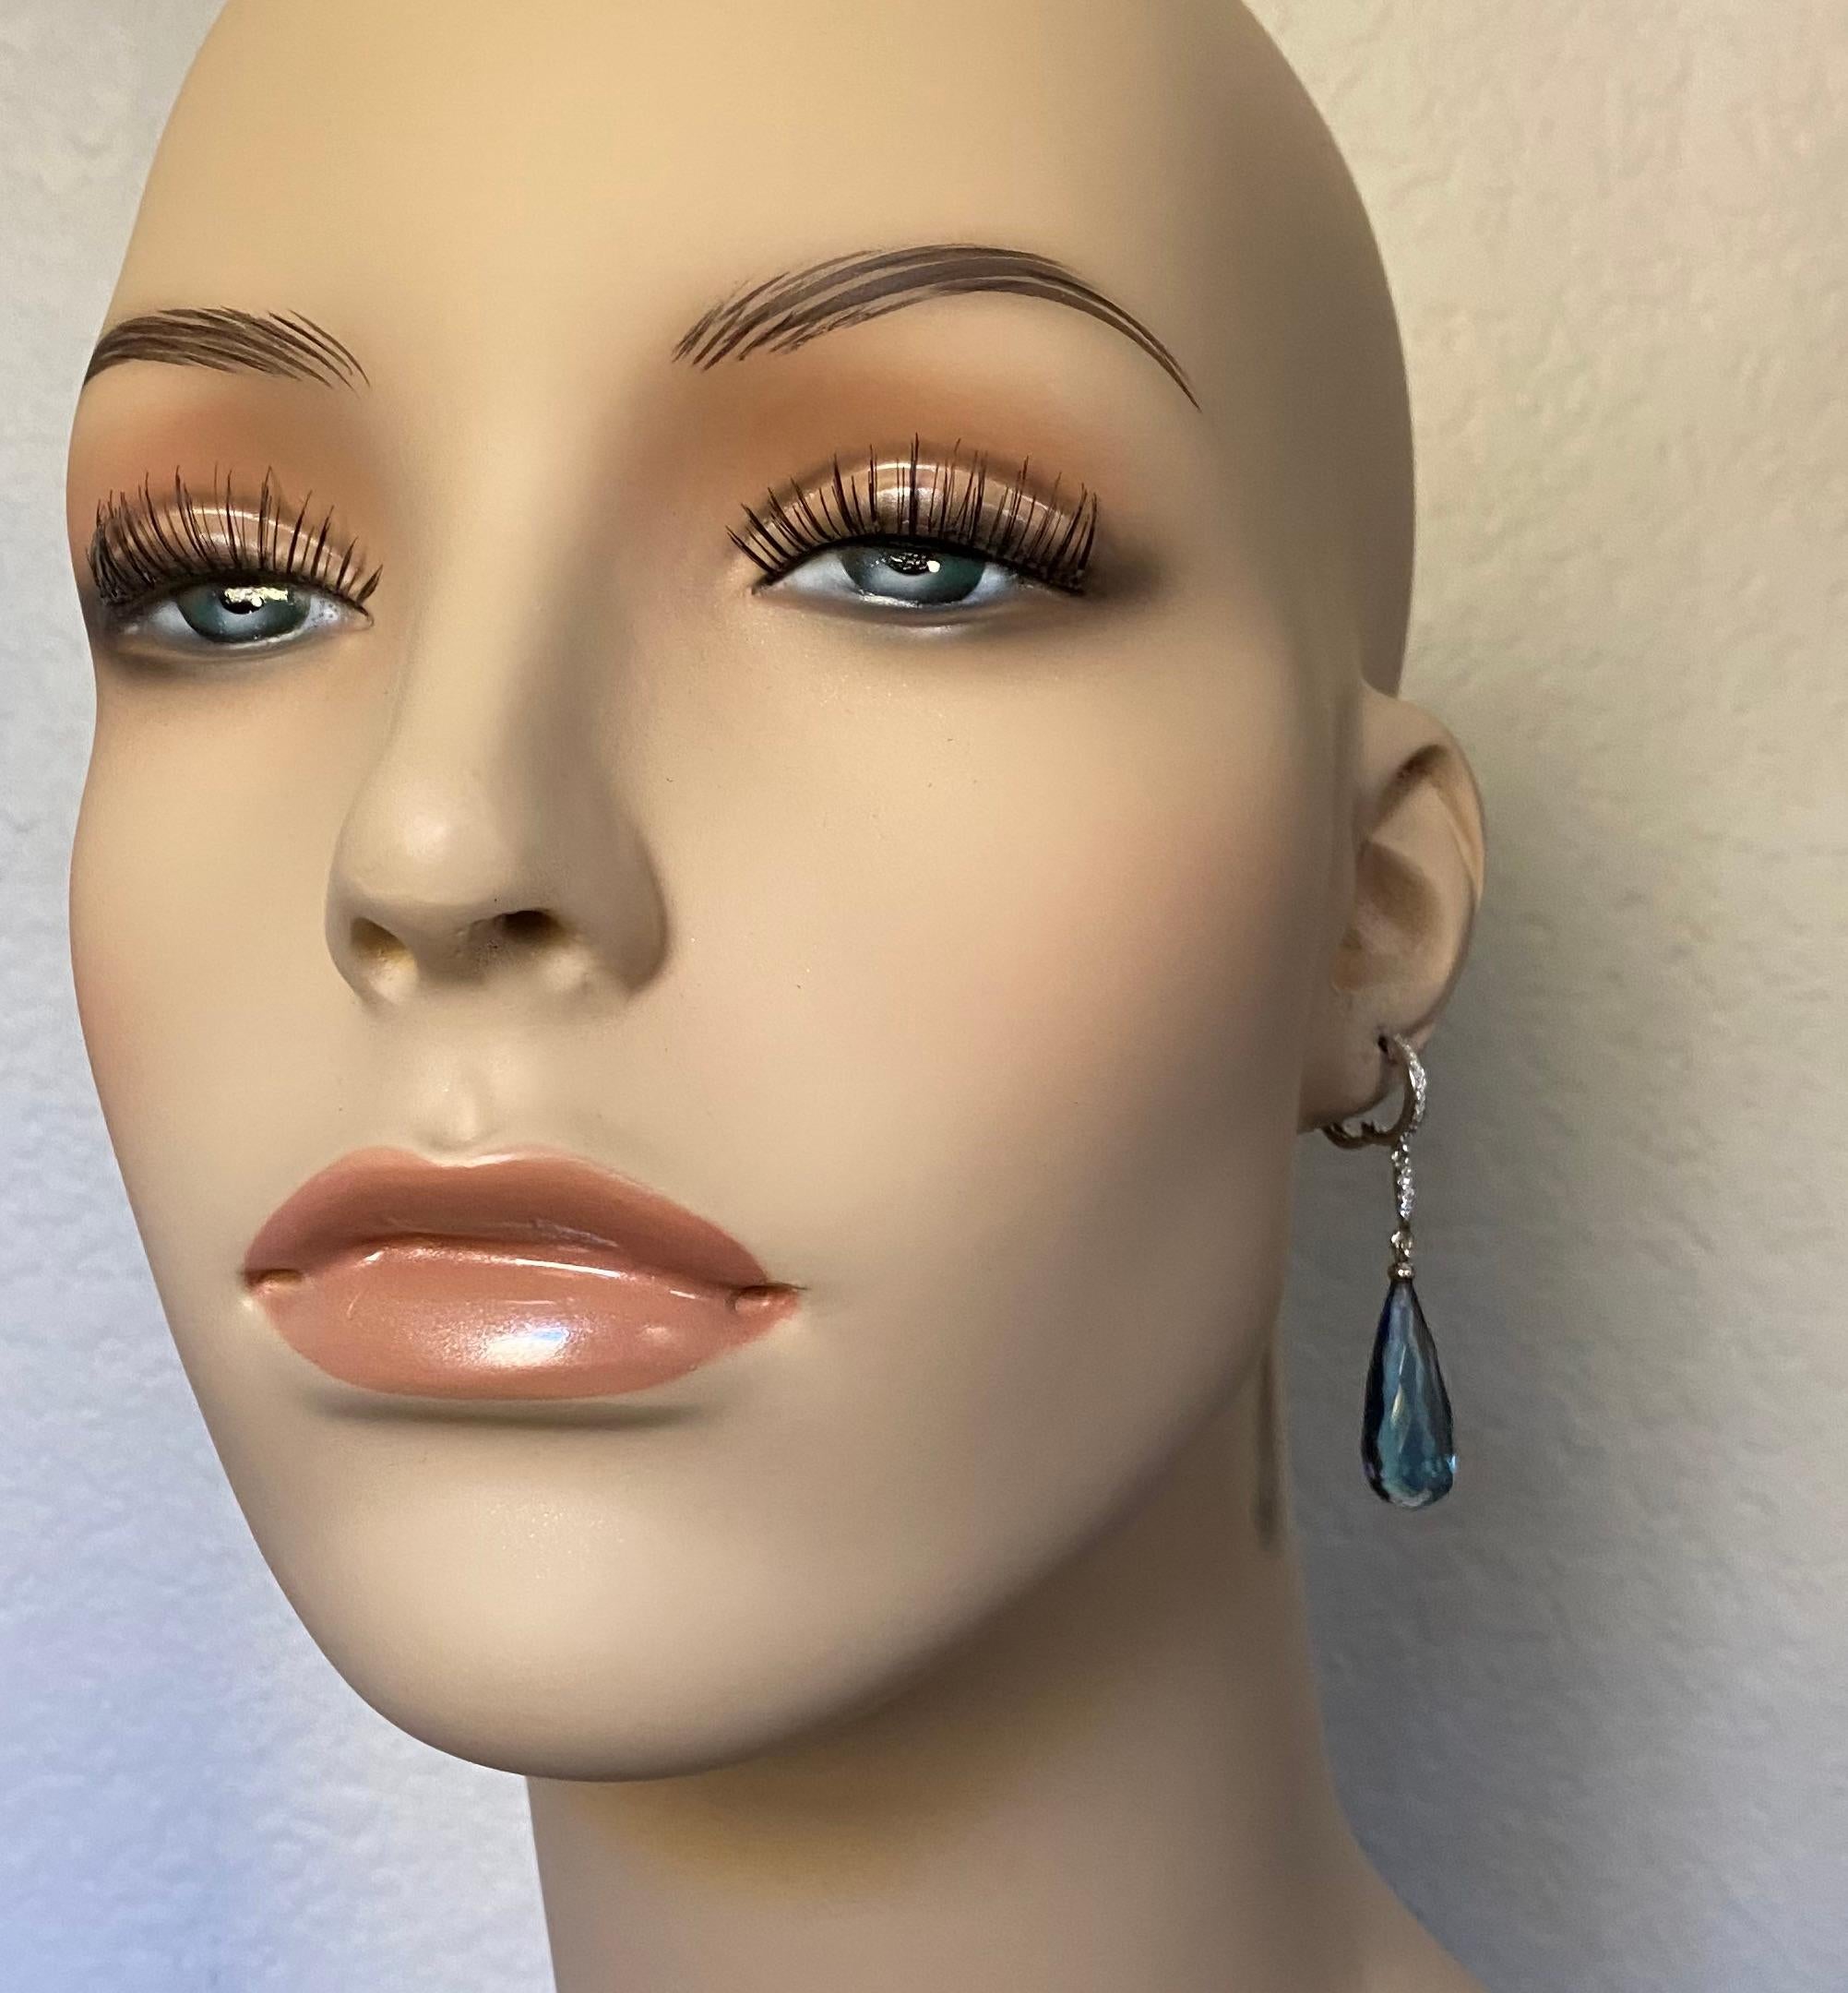 Blue topaz in an elongated briolette form are featured in these elegant dangle earrings.  The drops are a lovely sky blue and are very well cut and polished.  The are suspended from micro-pave diamond settings in white gold.  The blue topaz paired